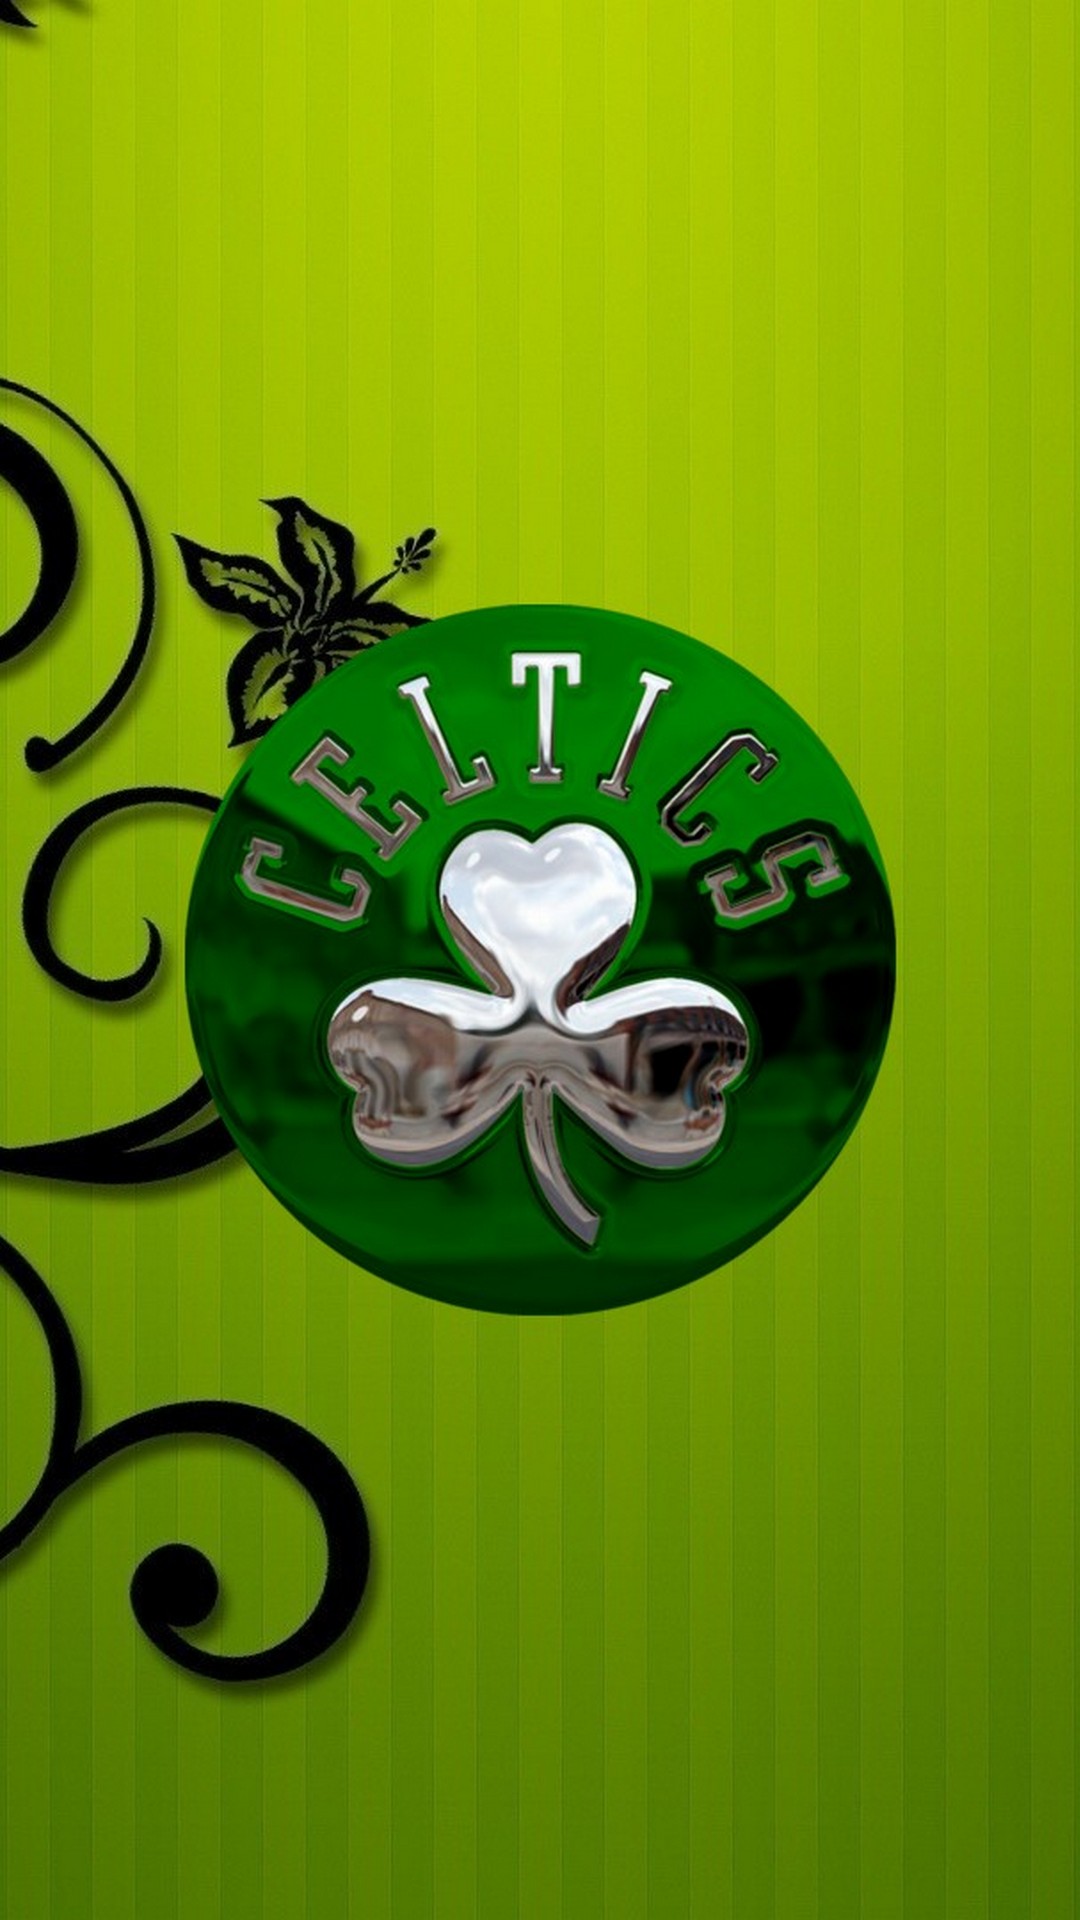 Boston Celtics HD Wallpapers For Mobile with image resolution 1080x1920 pixel. You can make this wallpaper for your Desktop Computer Backgrounds, Mac Wallpapers, Android Lock screen or iPhone Screensavers